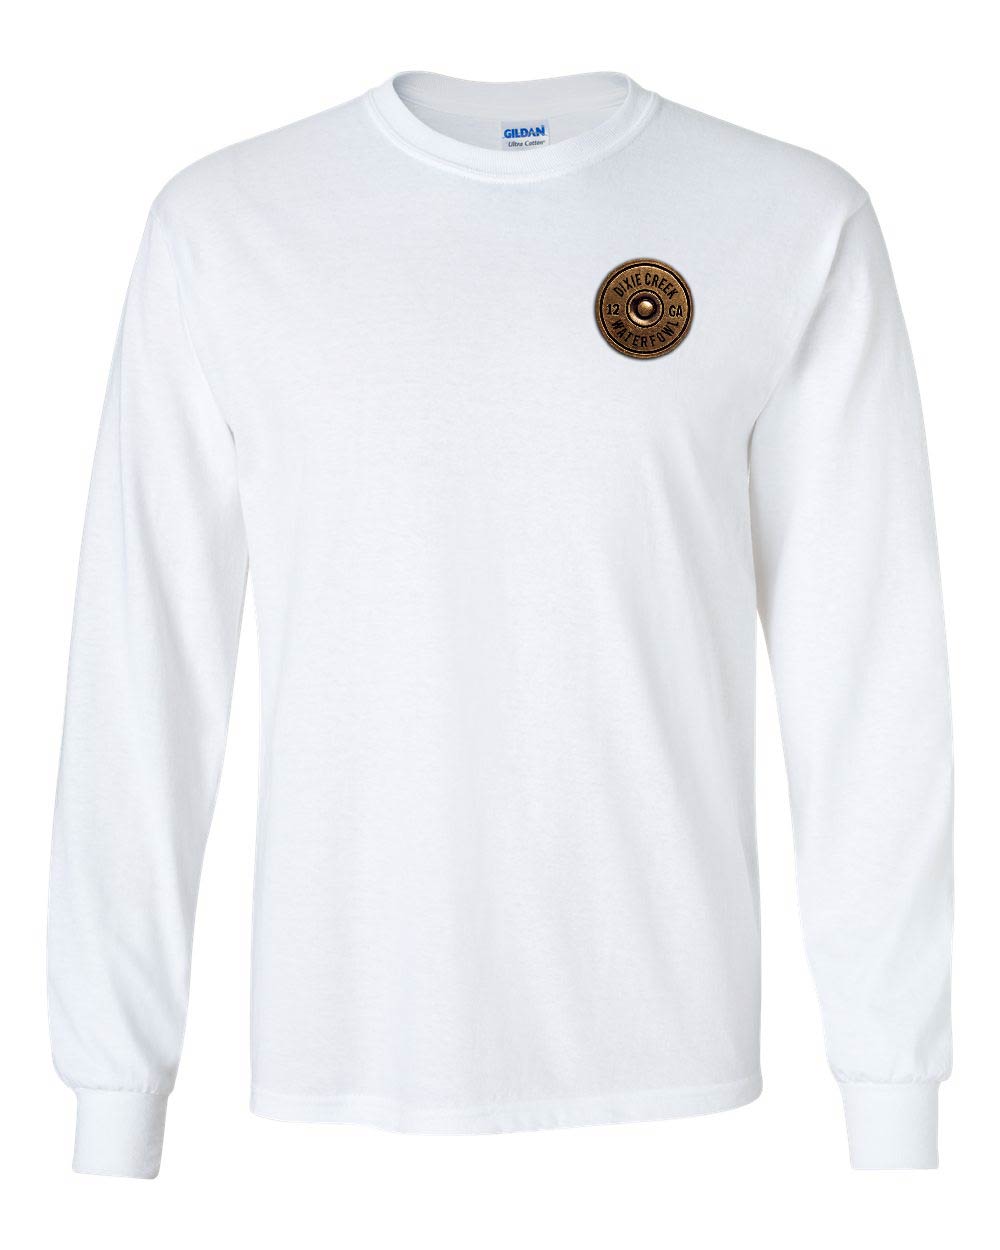 DCW Puppy - Long Sleeve